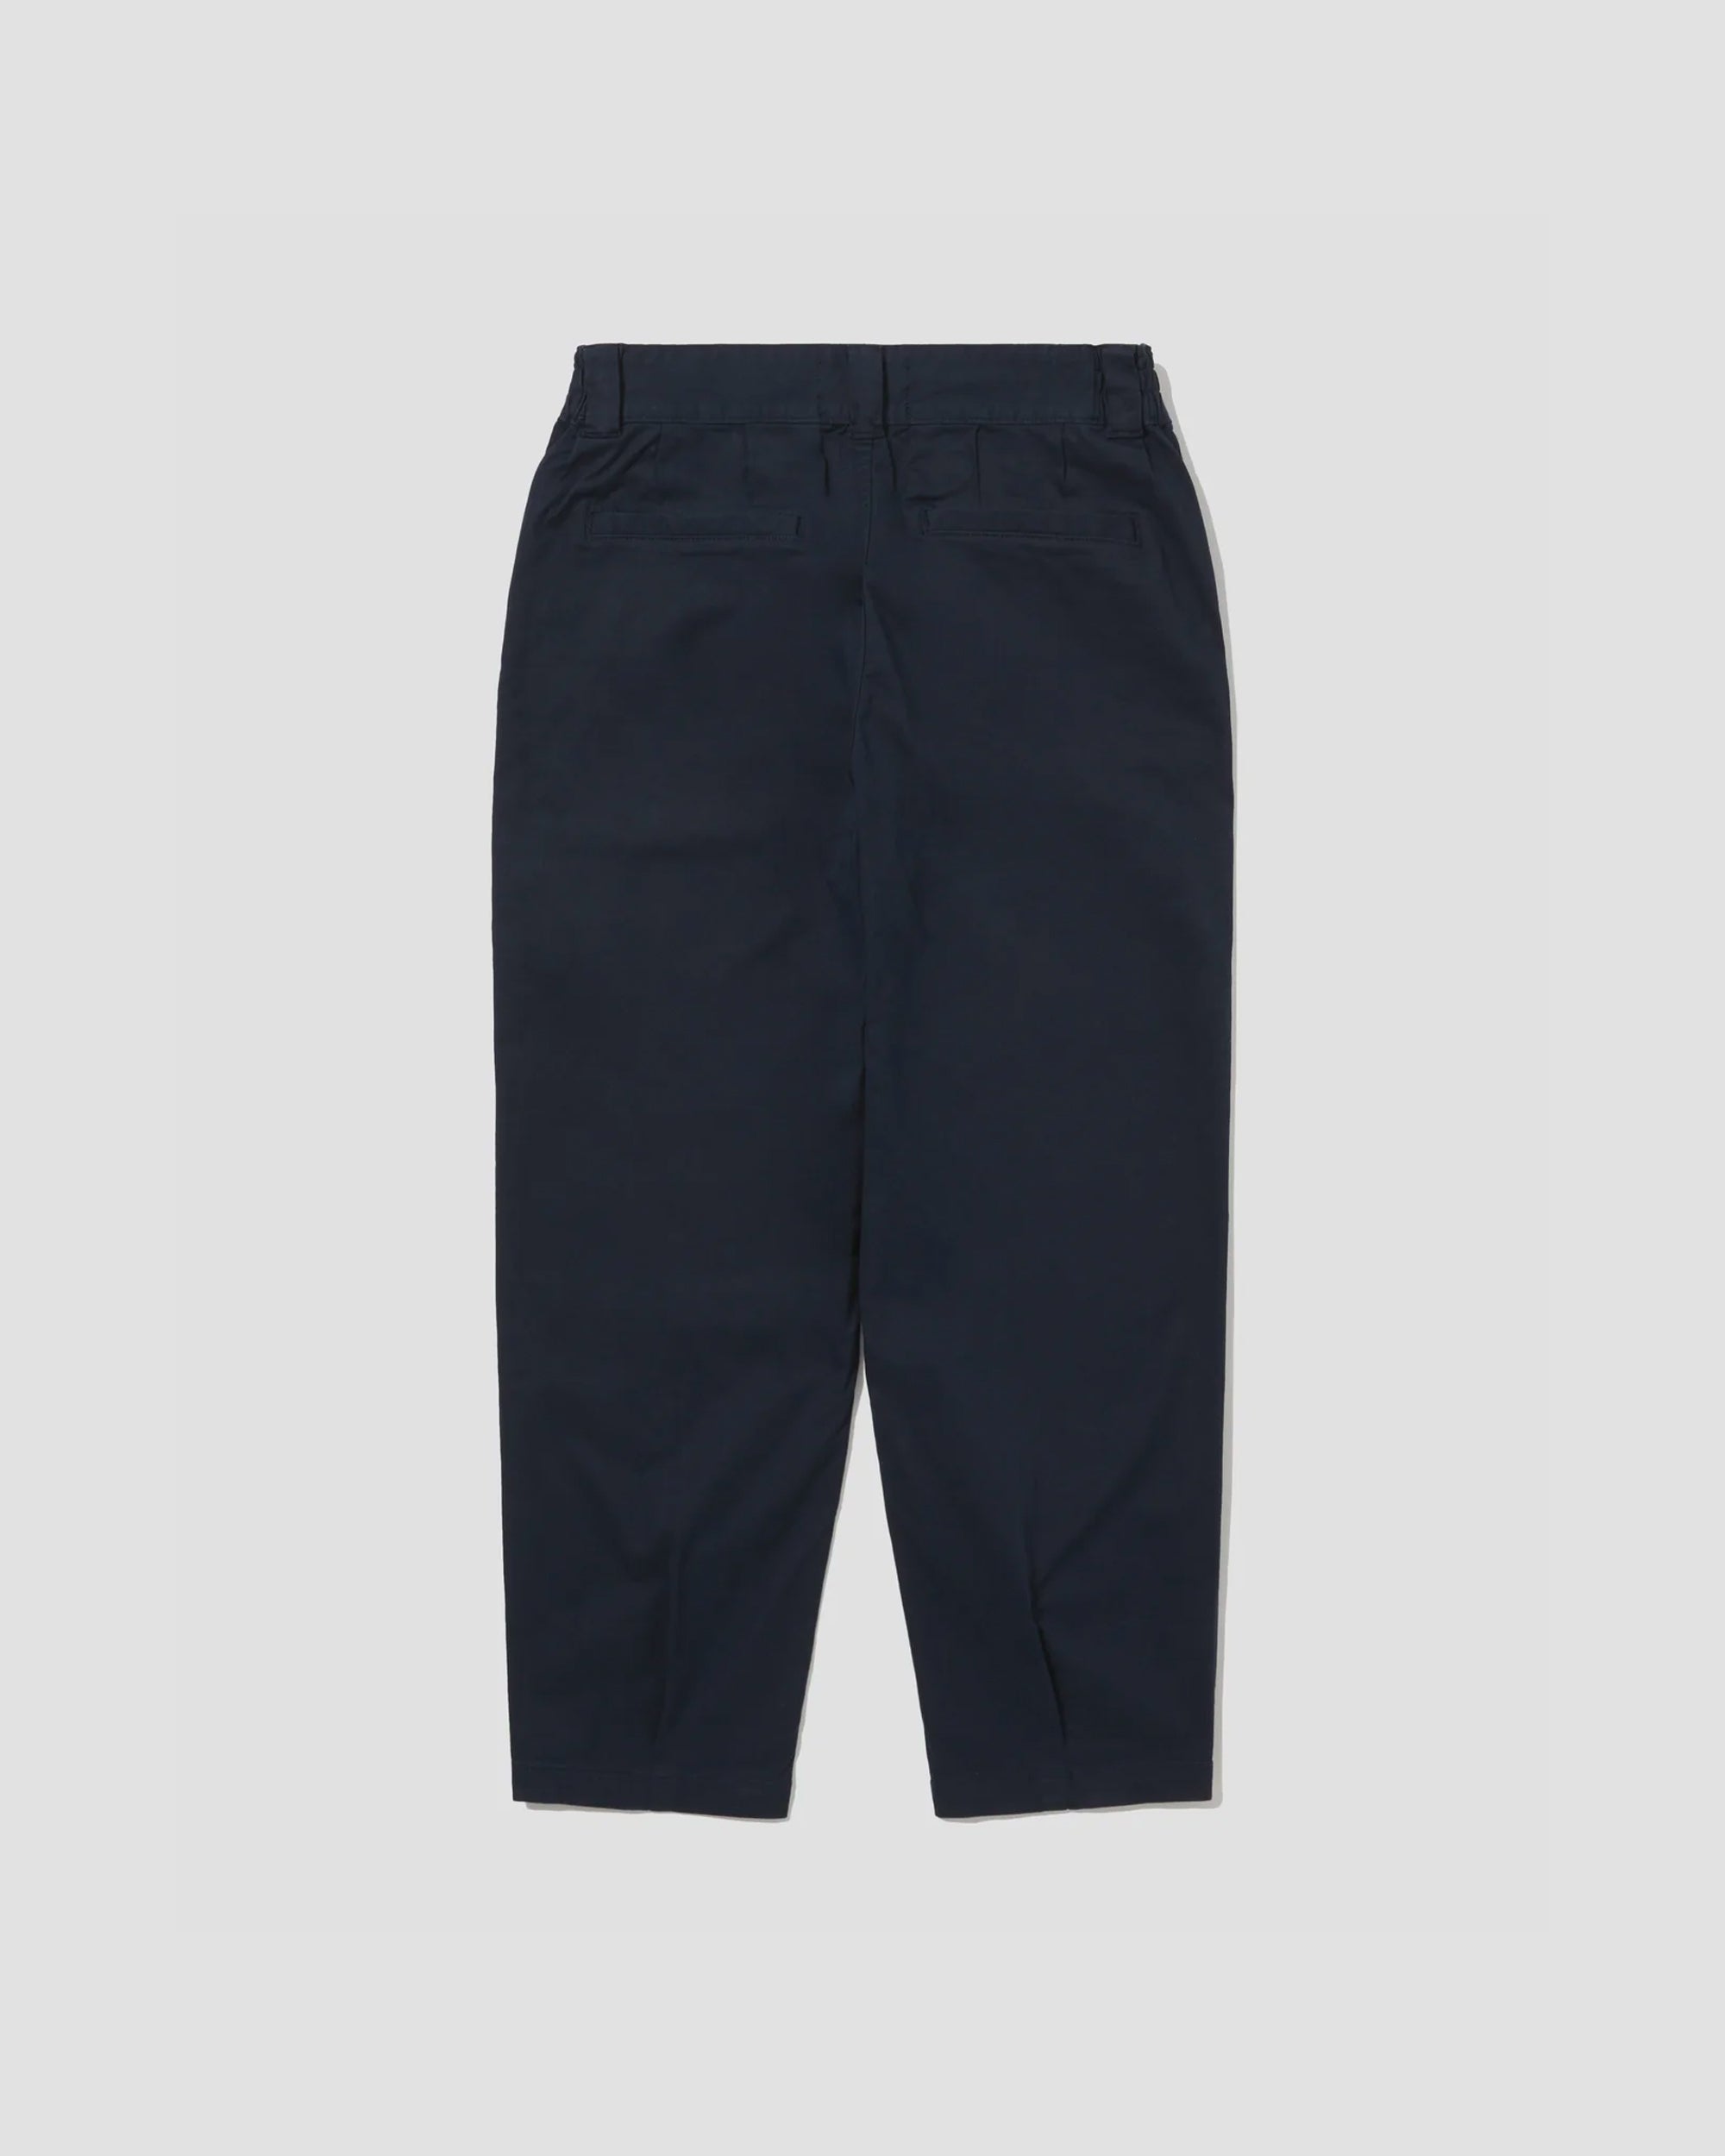 Baggy Tapered Pants - Navy